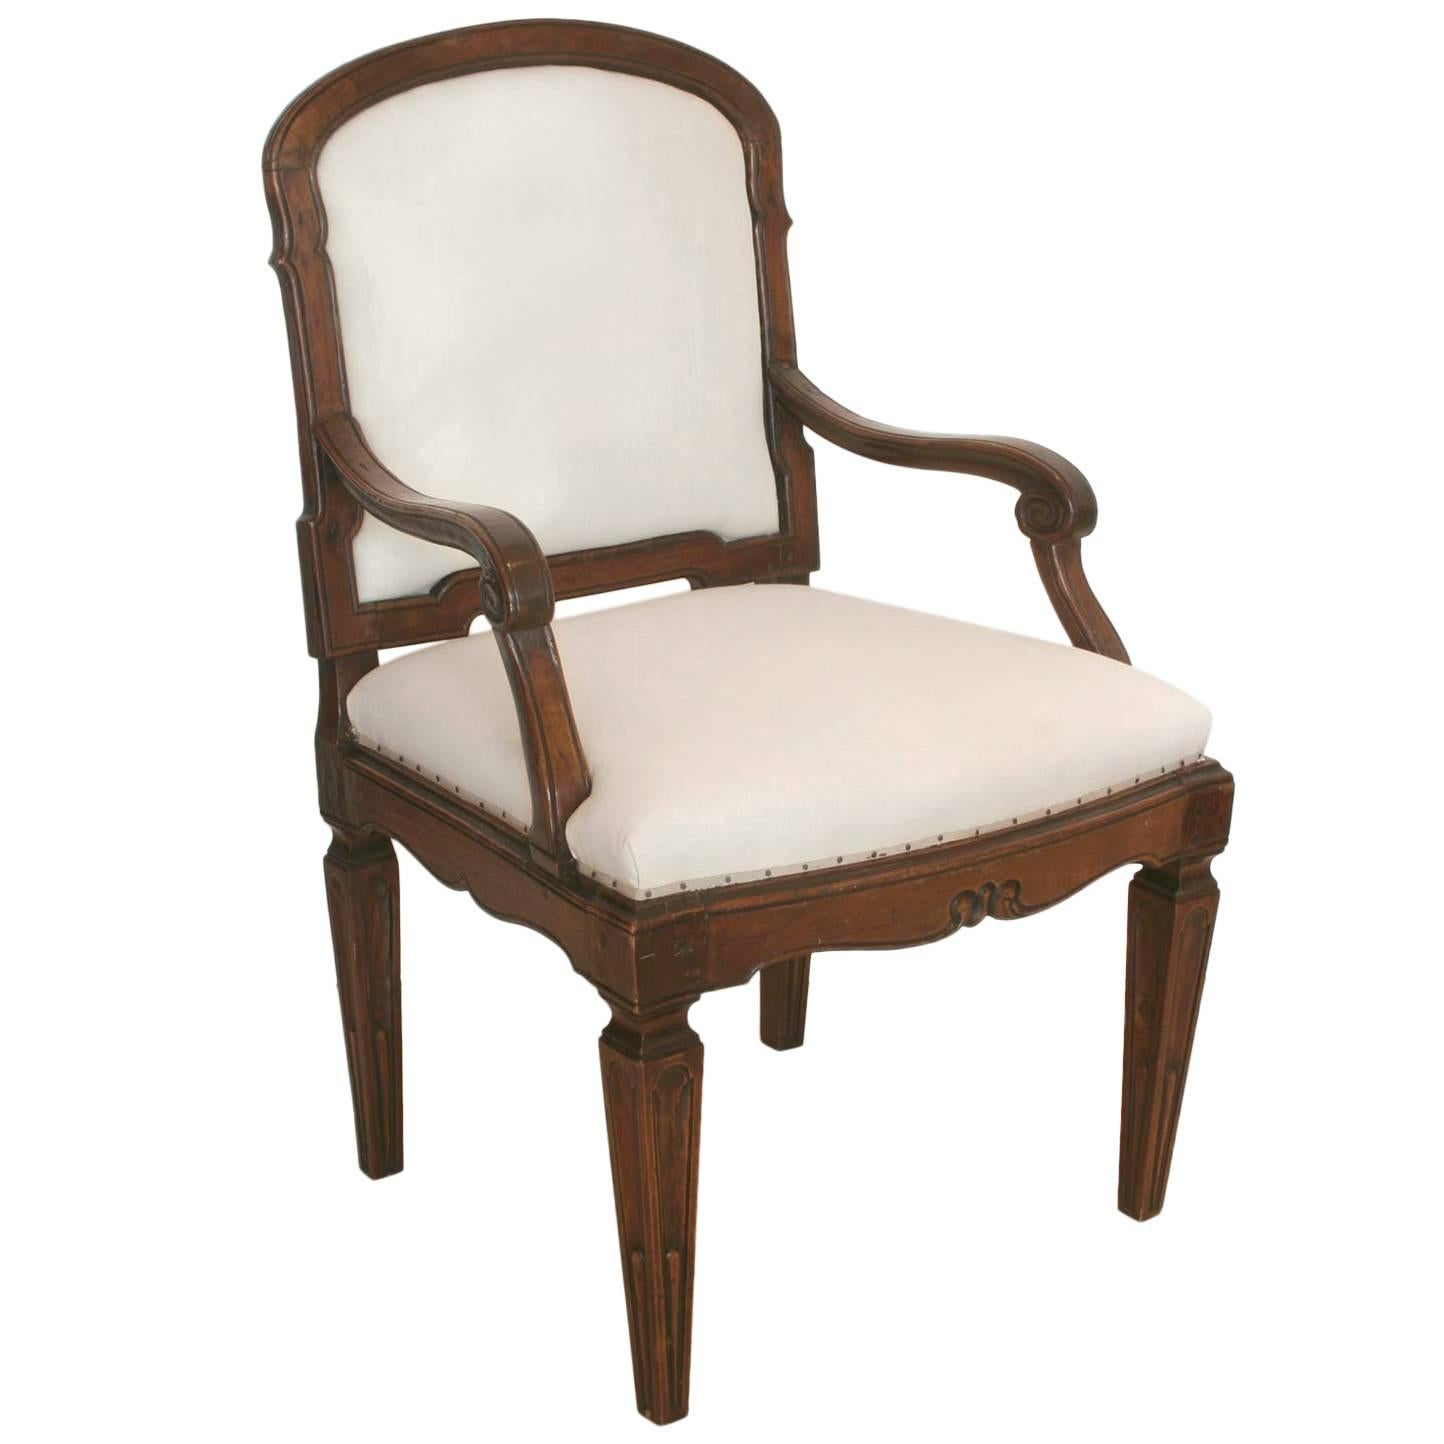 18th Century Mahogany Armchair with Scroll Arms, Upholstered Seat and Back For Sale